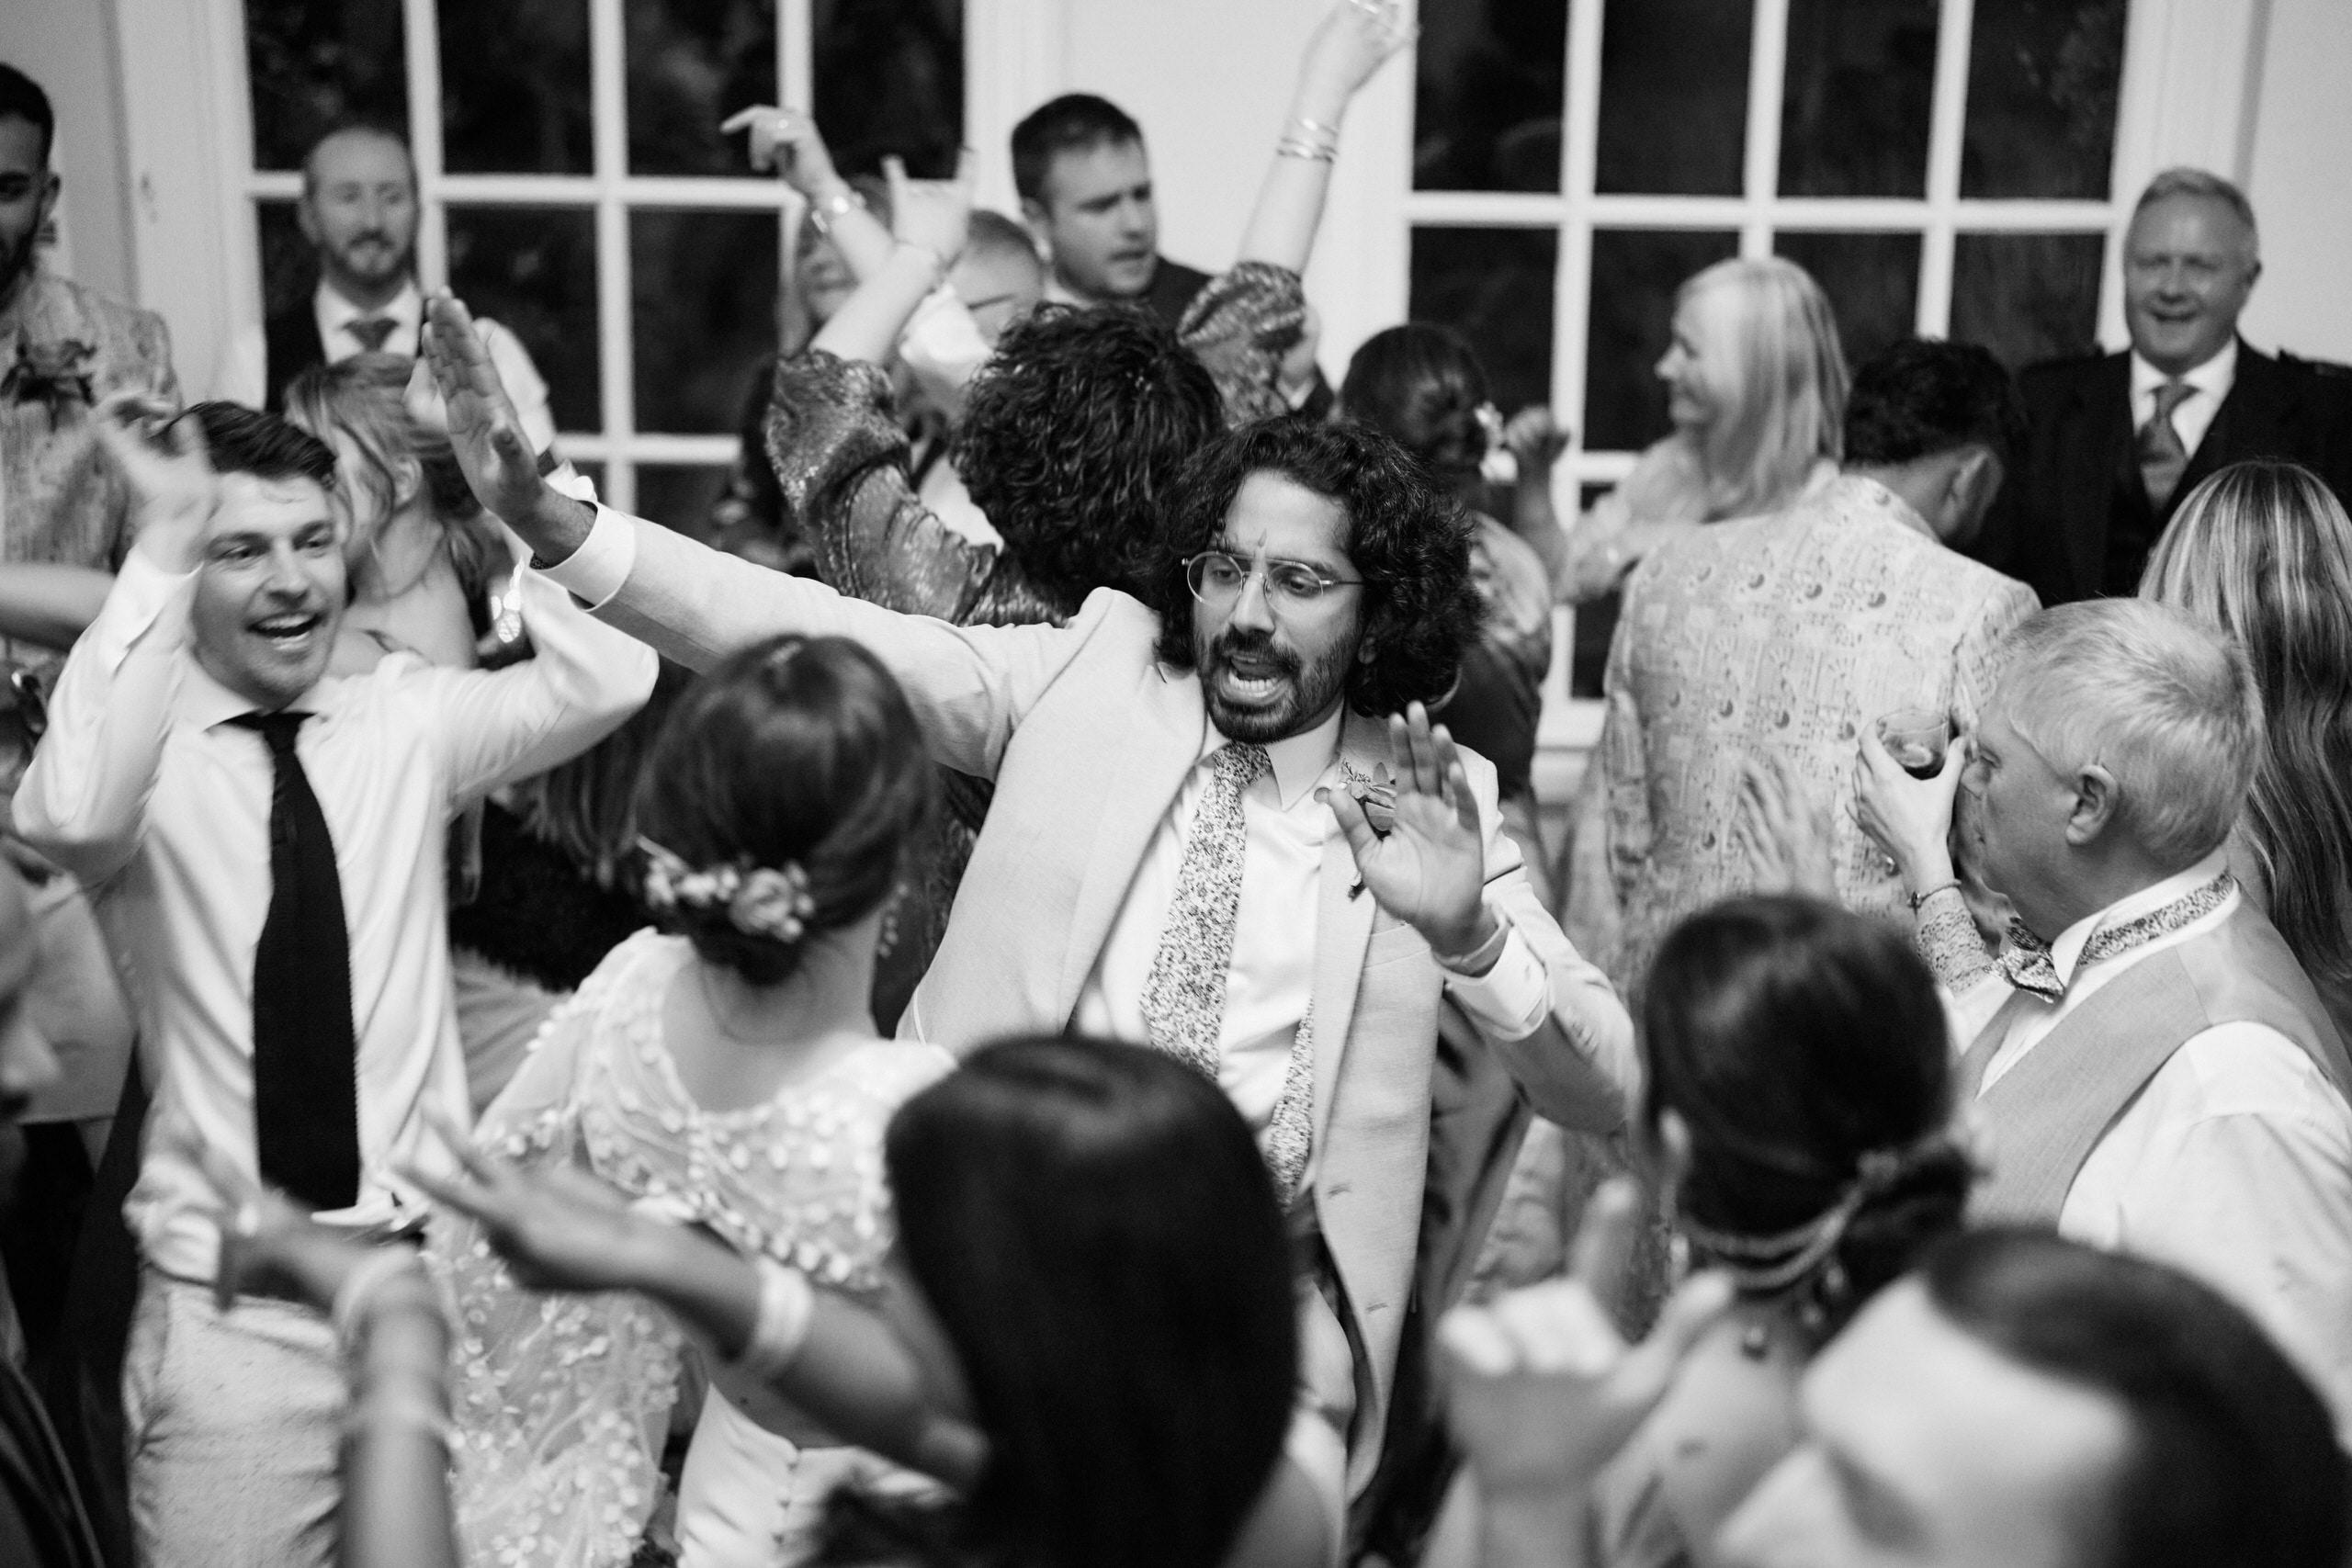 A grayscale picture showing a bunch of folks dancing at a wedding.